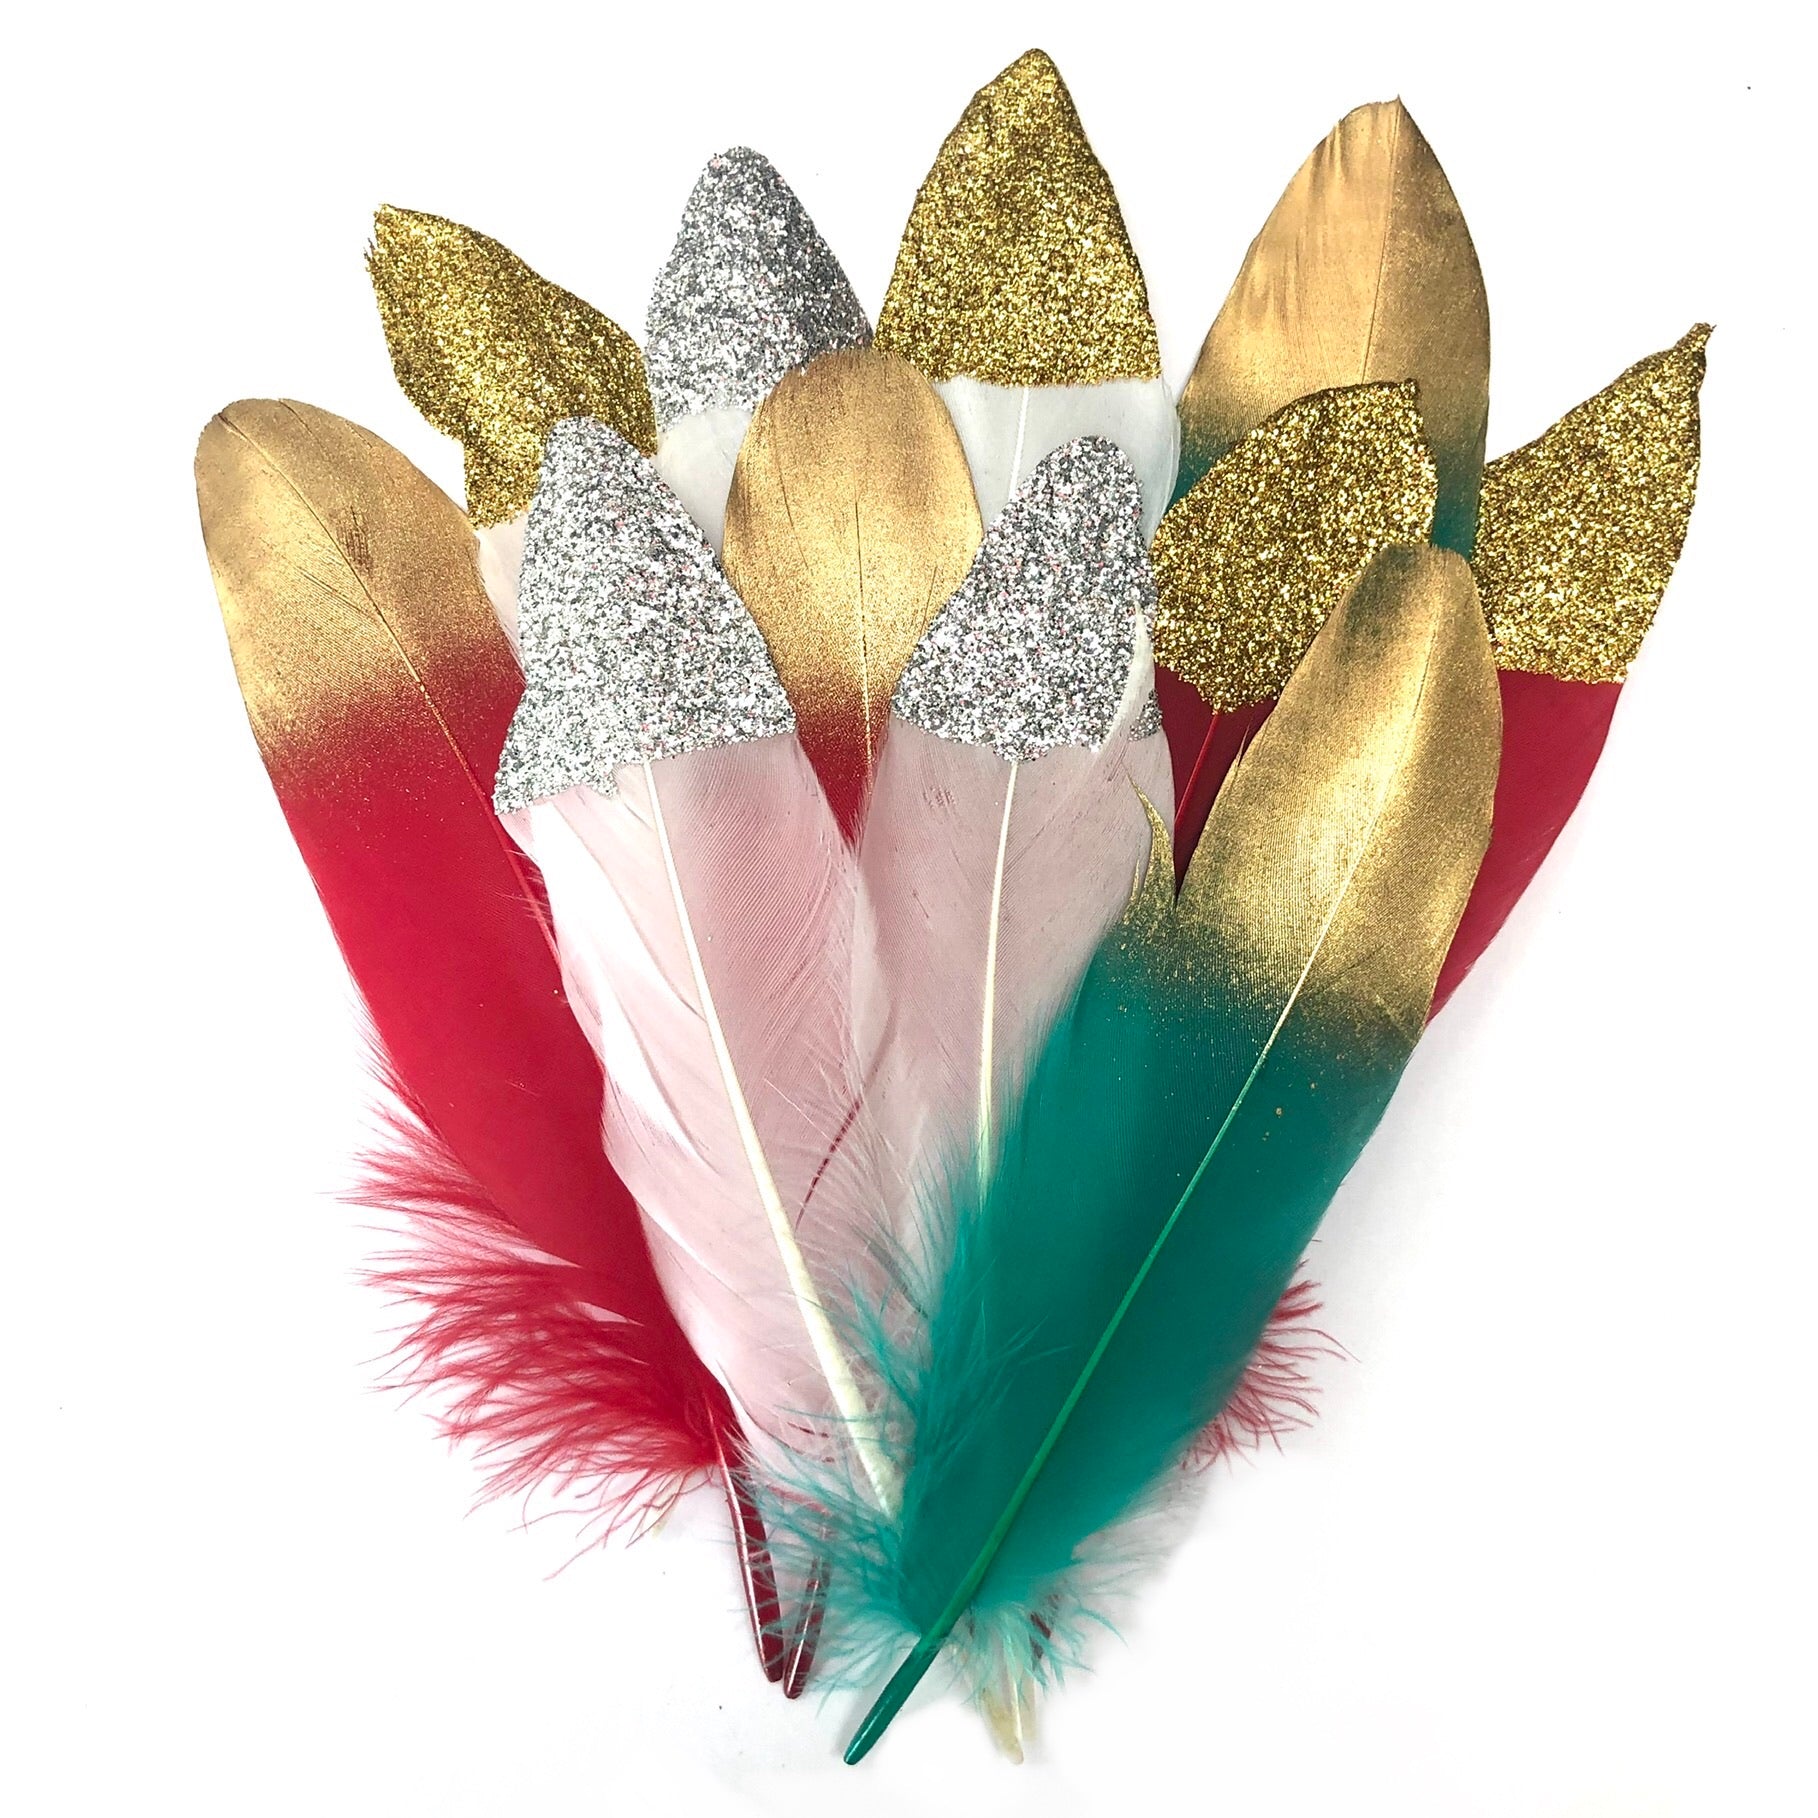 Goose Pointer Feathers Gold & Glitter Tipped x 10pcs - Festive Christmas Mix - Style 20